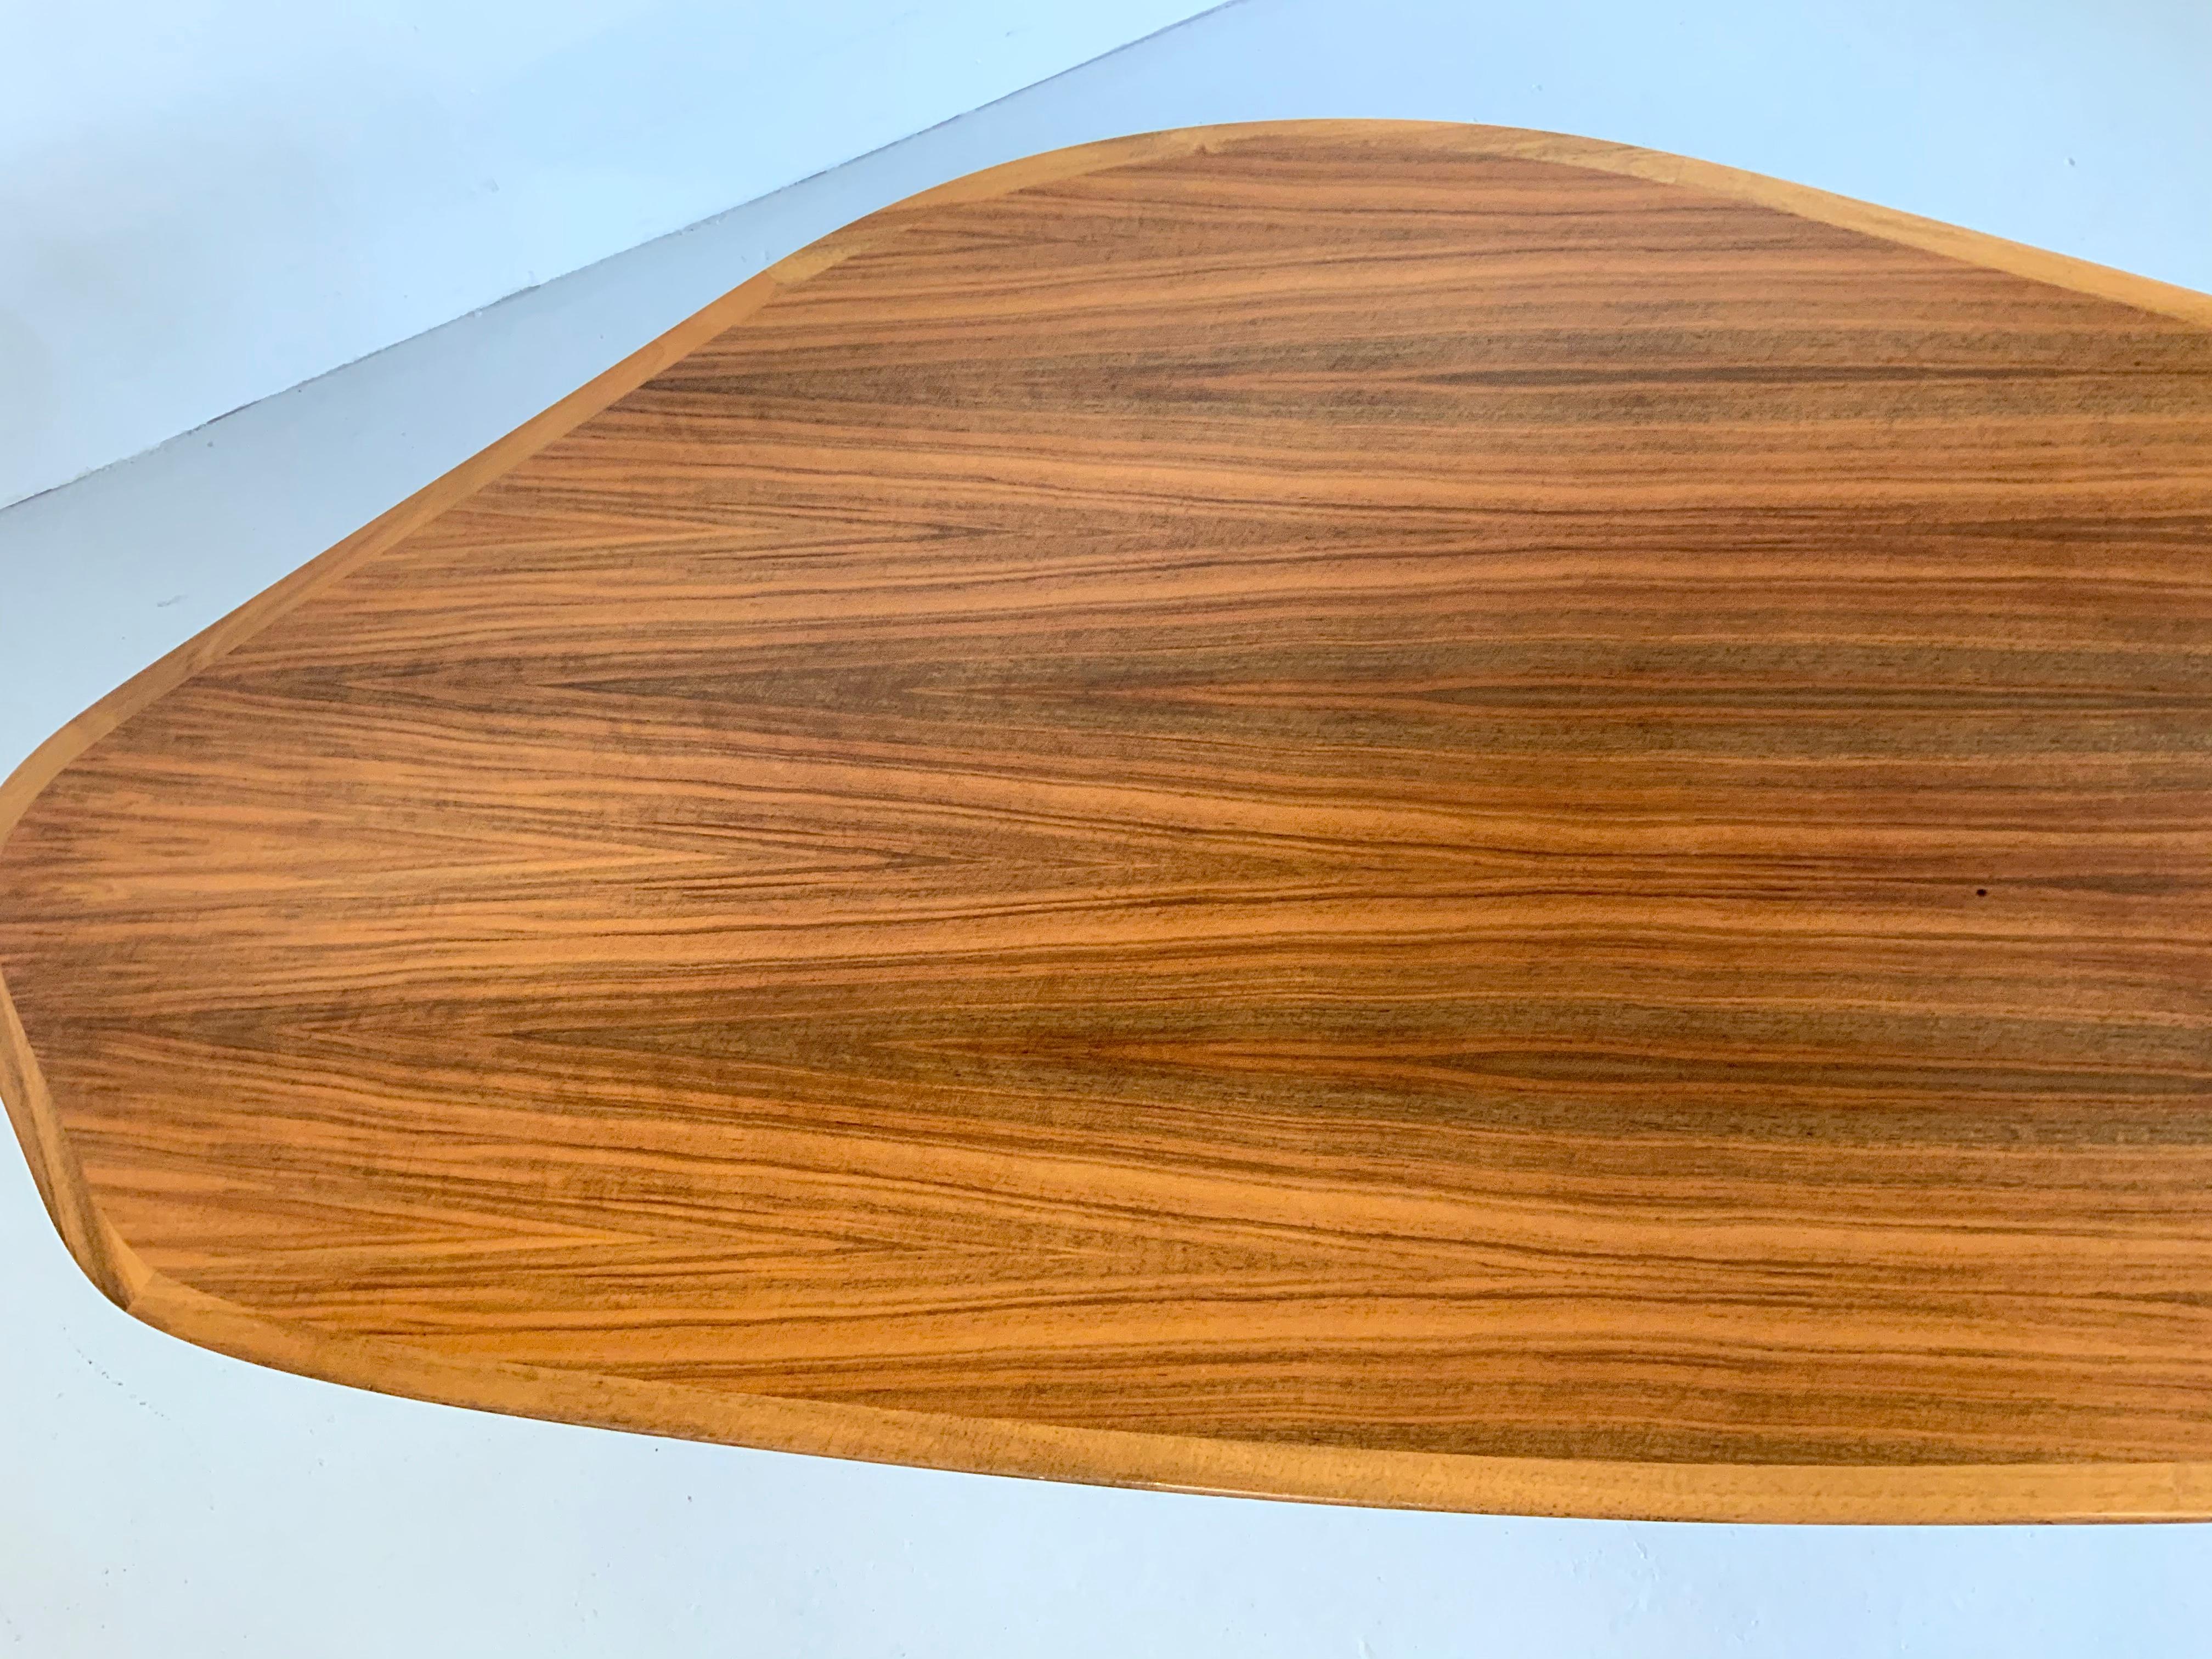 Large Svante Skogh for Laauser Midcentury Walnut Curved Coffee Table, 1950s For Sale 3